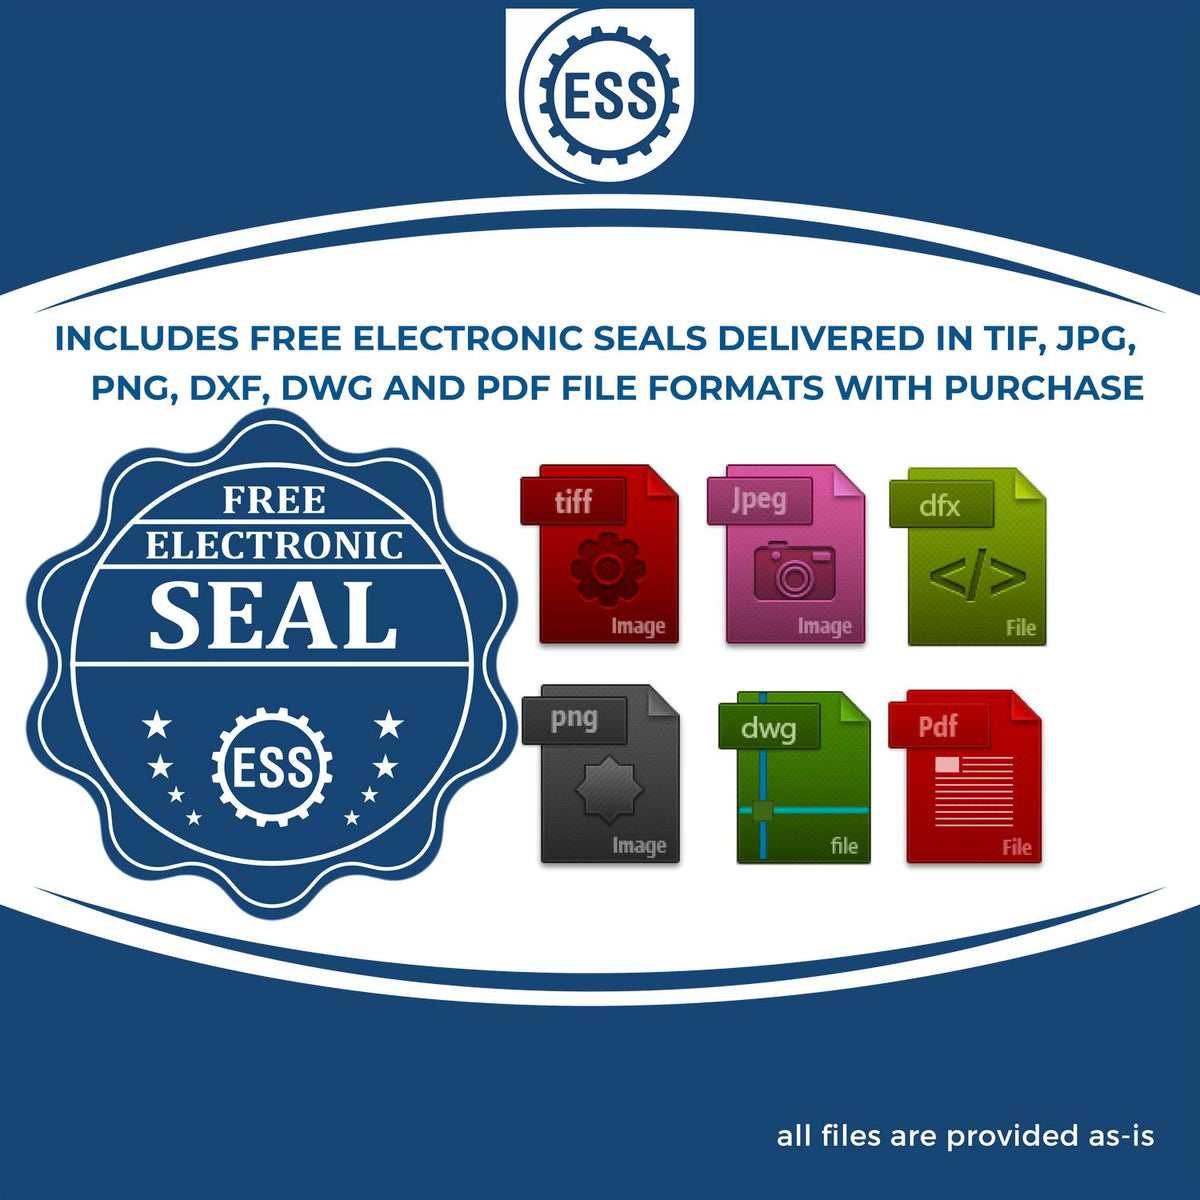 An infographic for the free electronic seal for the Extended Long Reach Hawaii Architect Seal Embosser illustrating the different file type icons such as DXF, DWG, TIF, JPG and PNG.